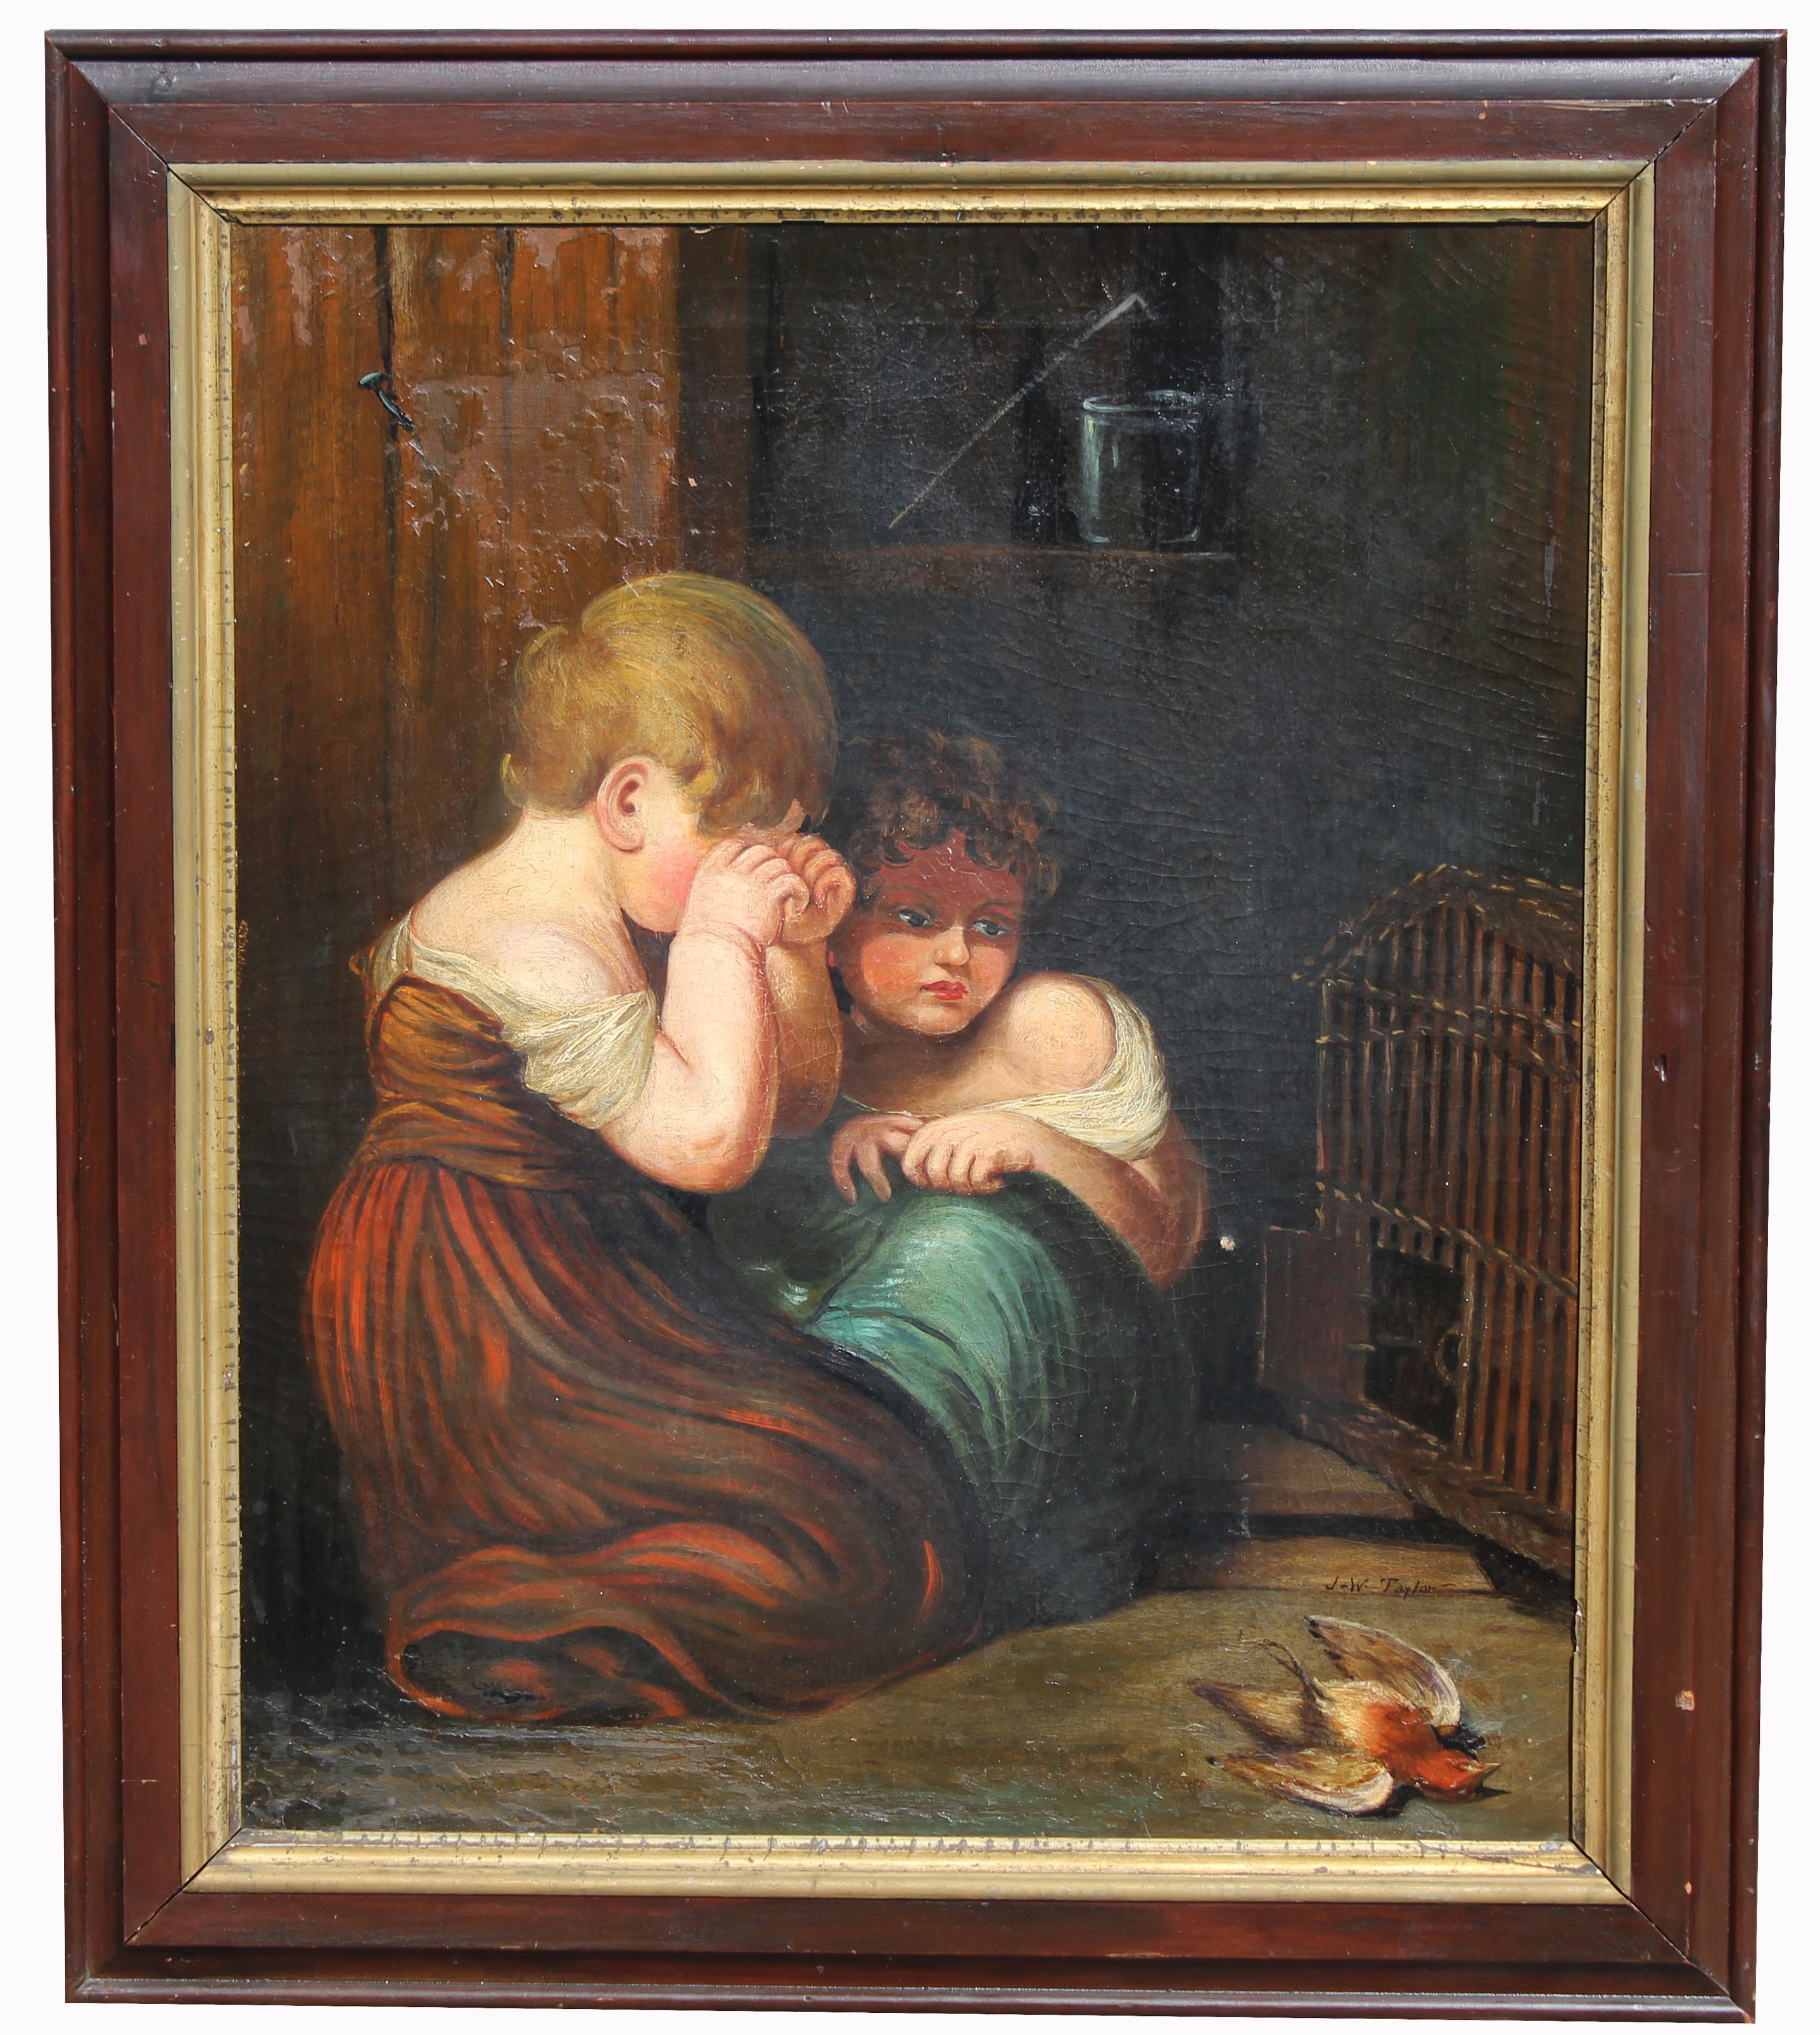 Signed, Antique Painting Painting of Children